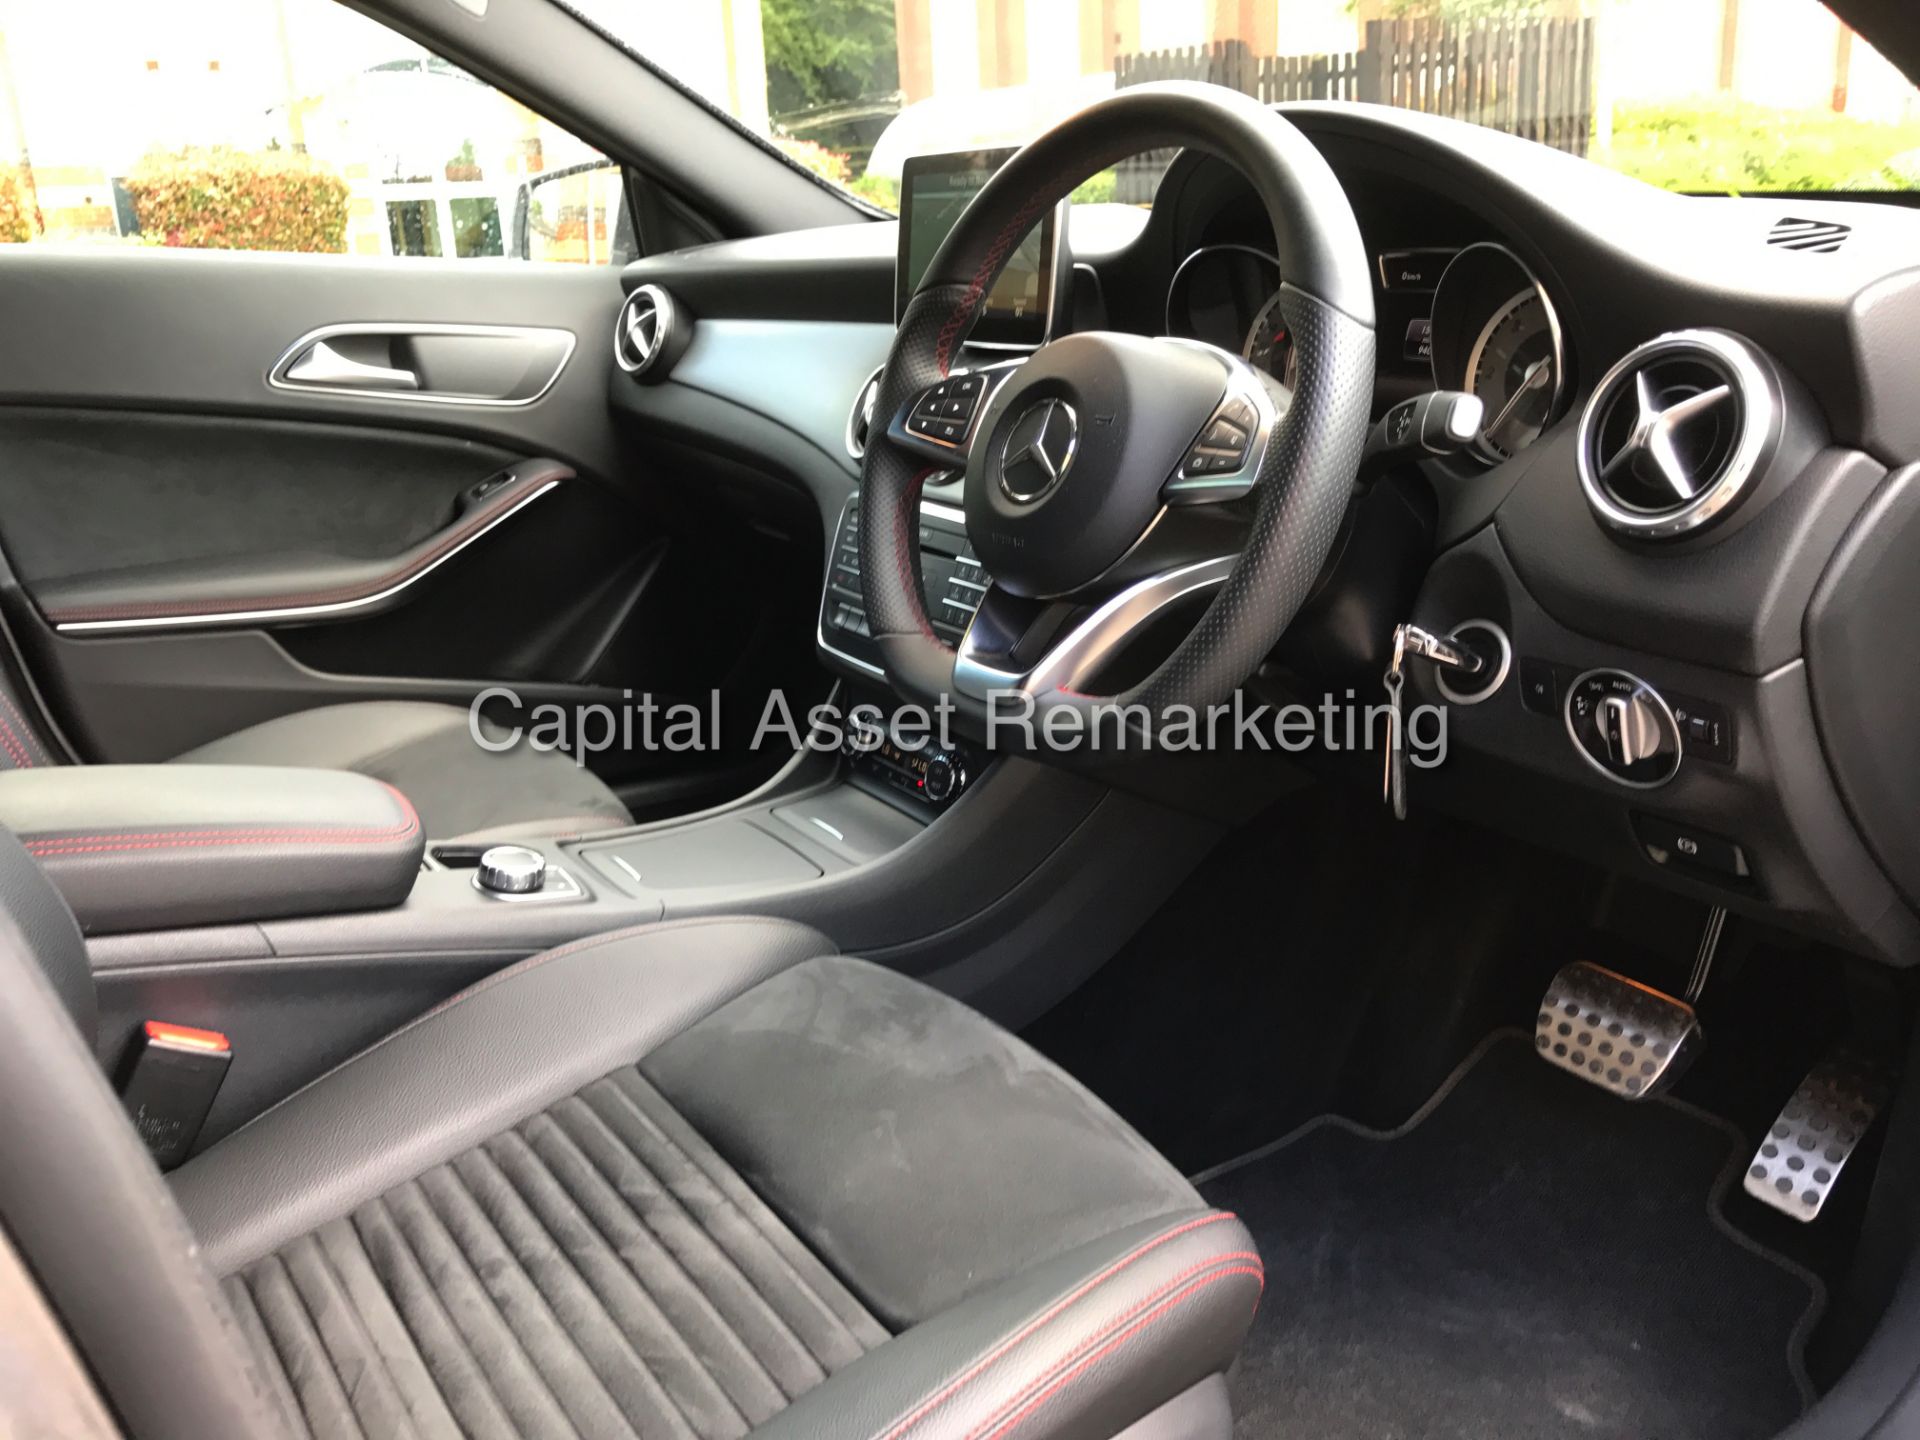 (On Sale) MERCEDES - BENZ GLA 220d "AMG LINE" 4 MATIC - 7G TRONIC AUTO - (2016 MODEL) 1 OWNER - Image 12 of 25